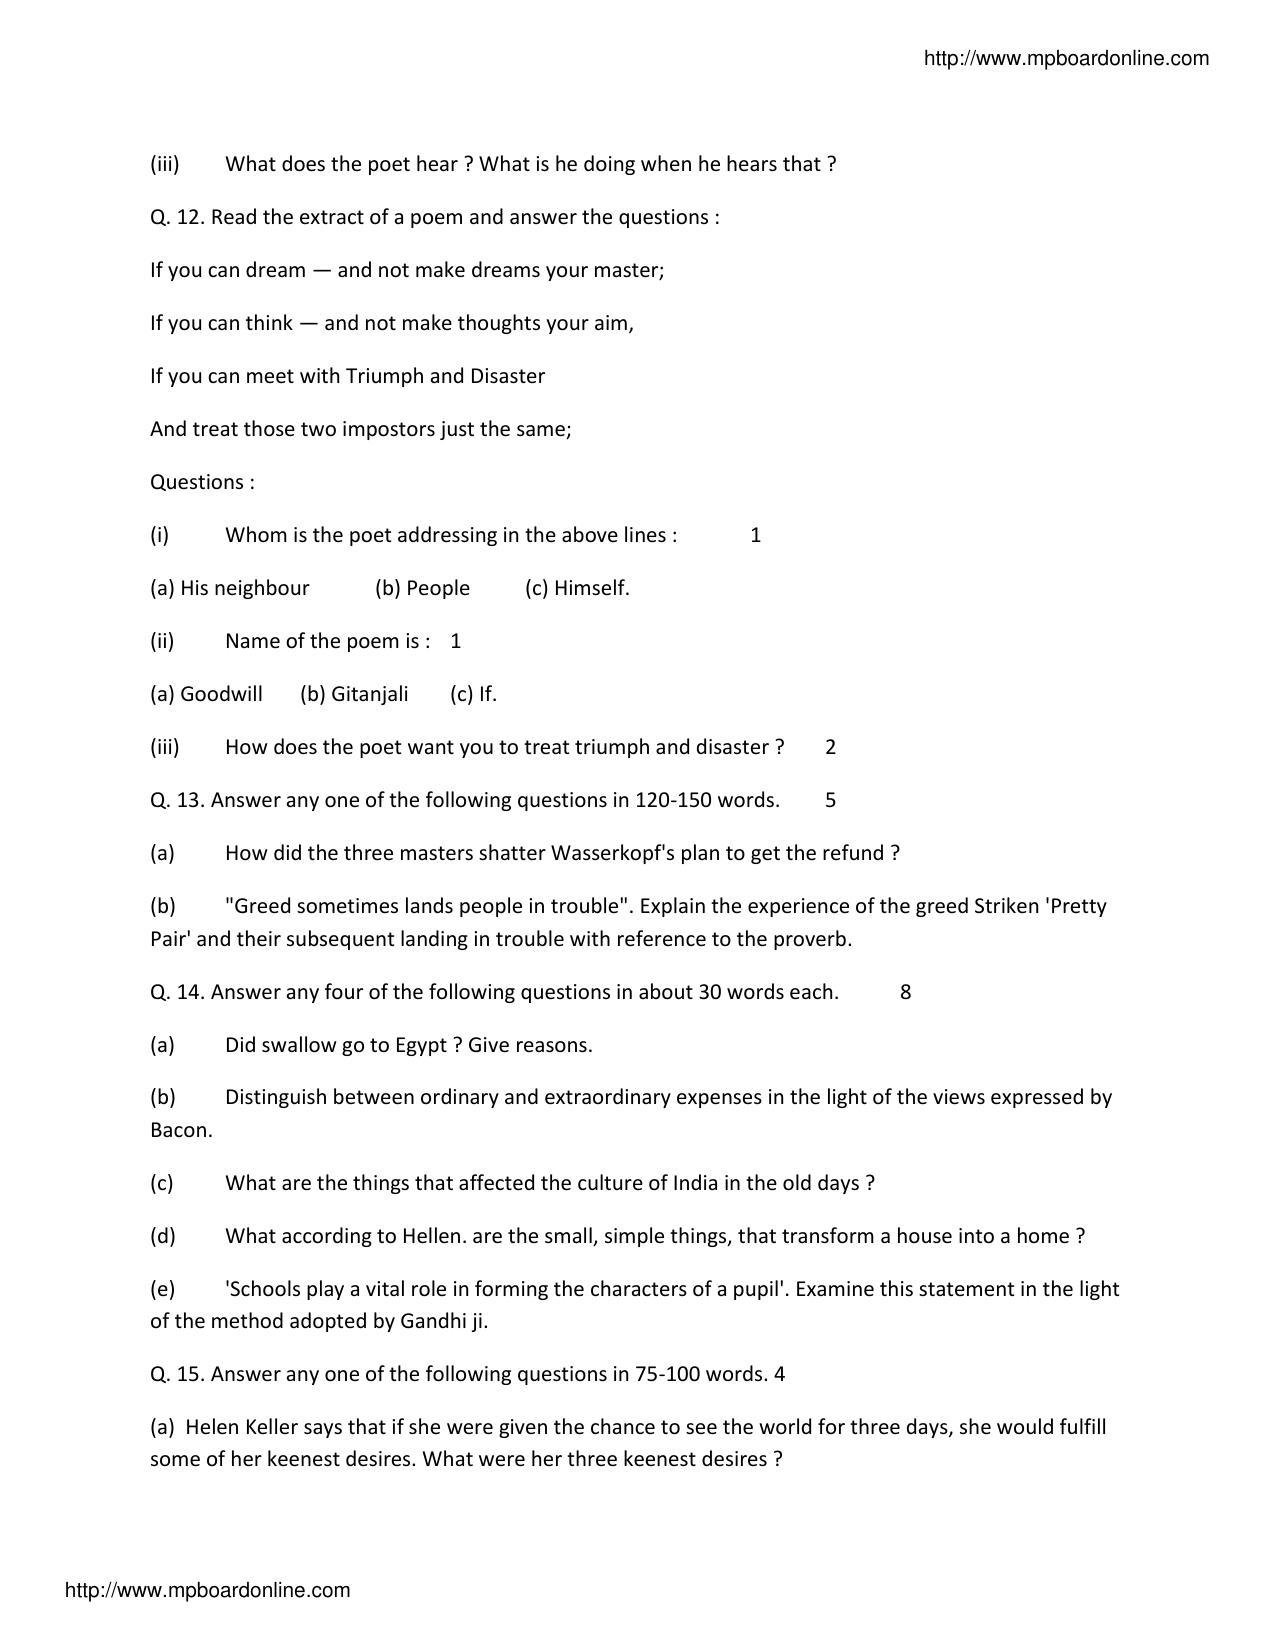 MP Board Class 10 English 2016 Question Paper - Page 7